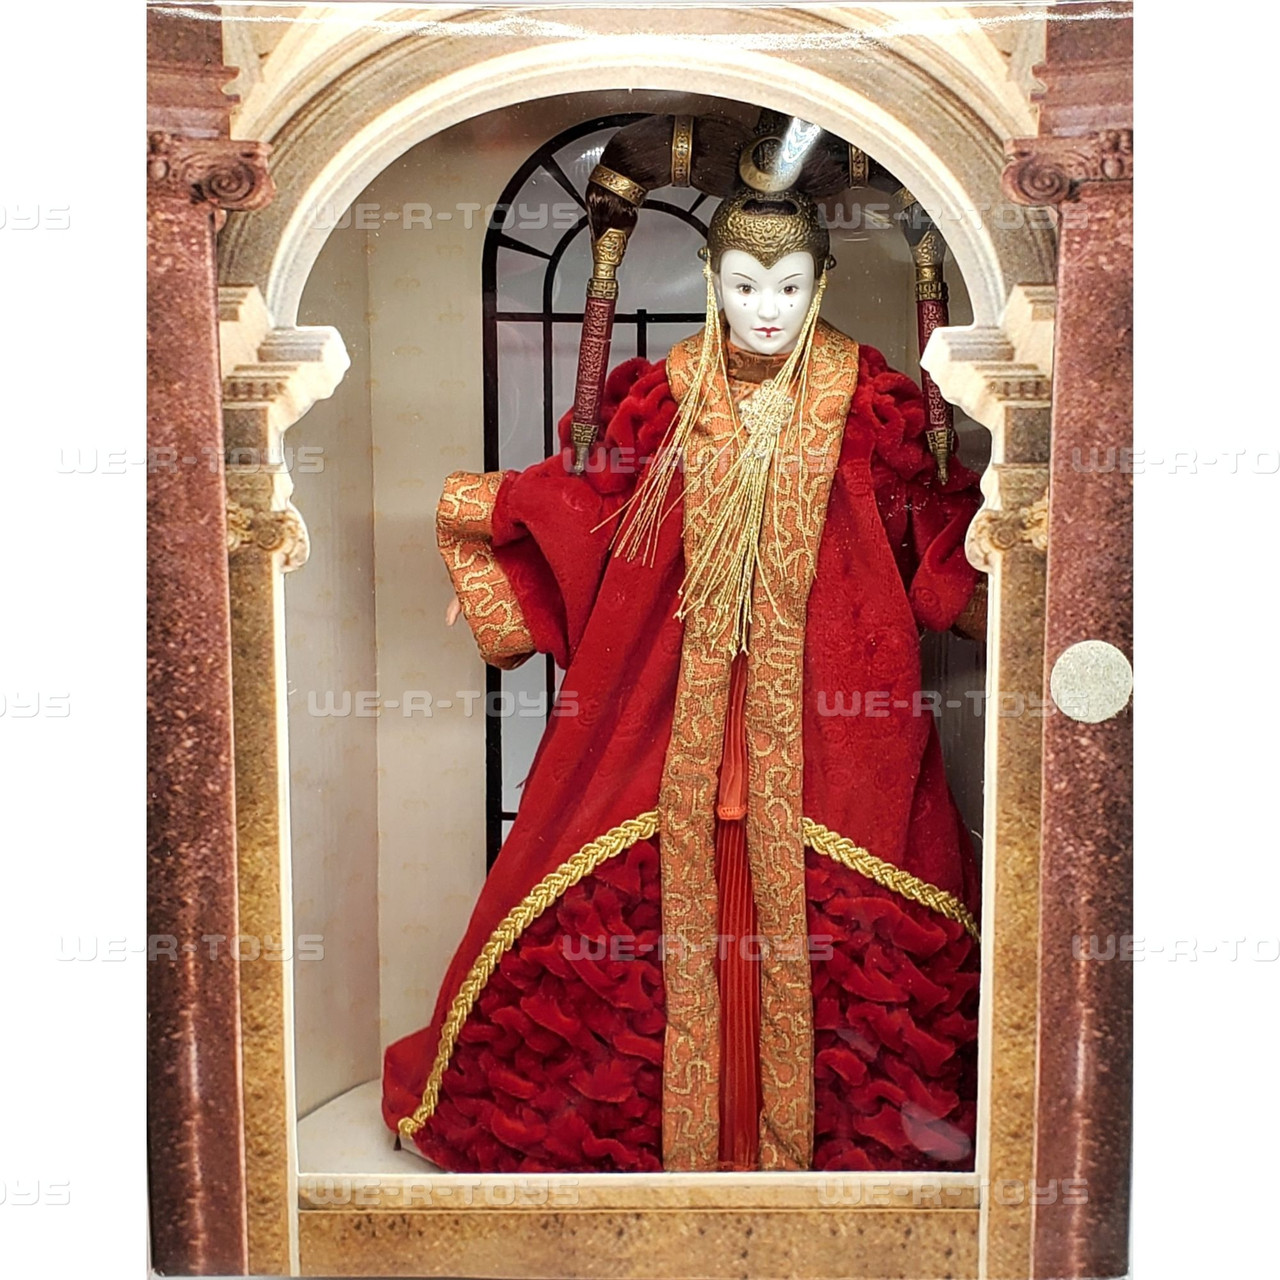 1999 Star Wars Episode I Queen Amidala Red Senate Gown Doll 